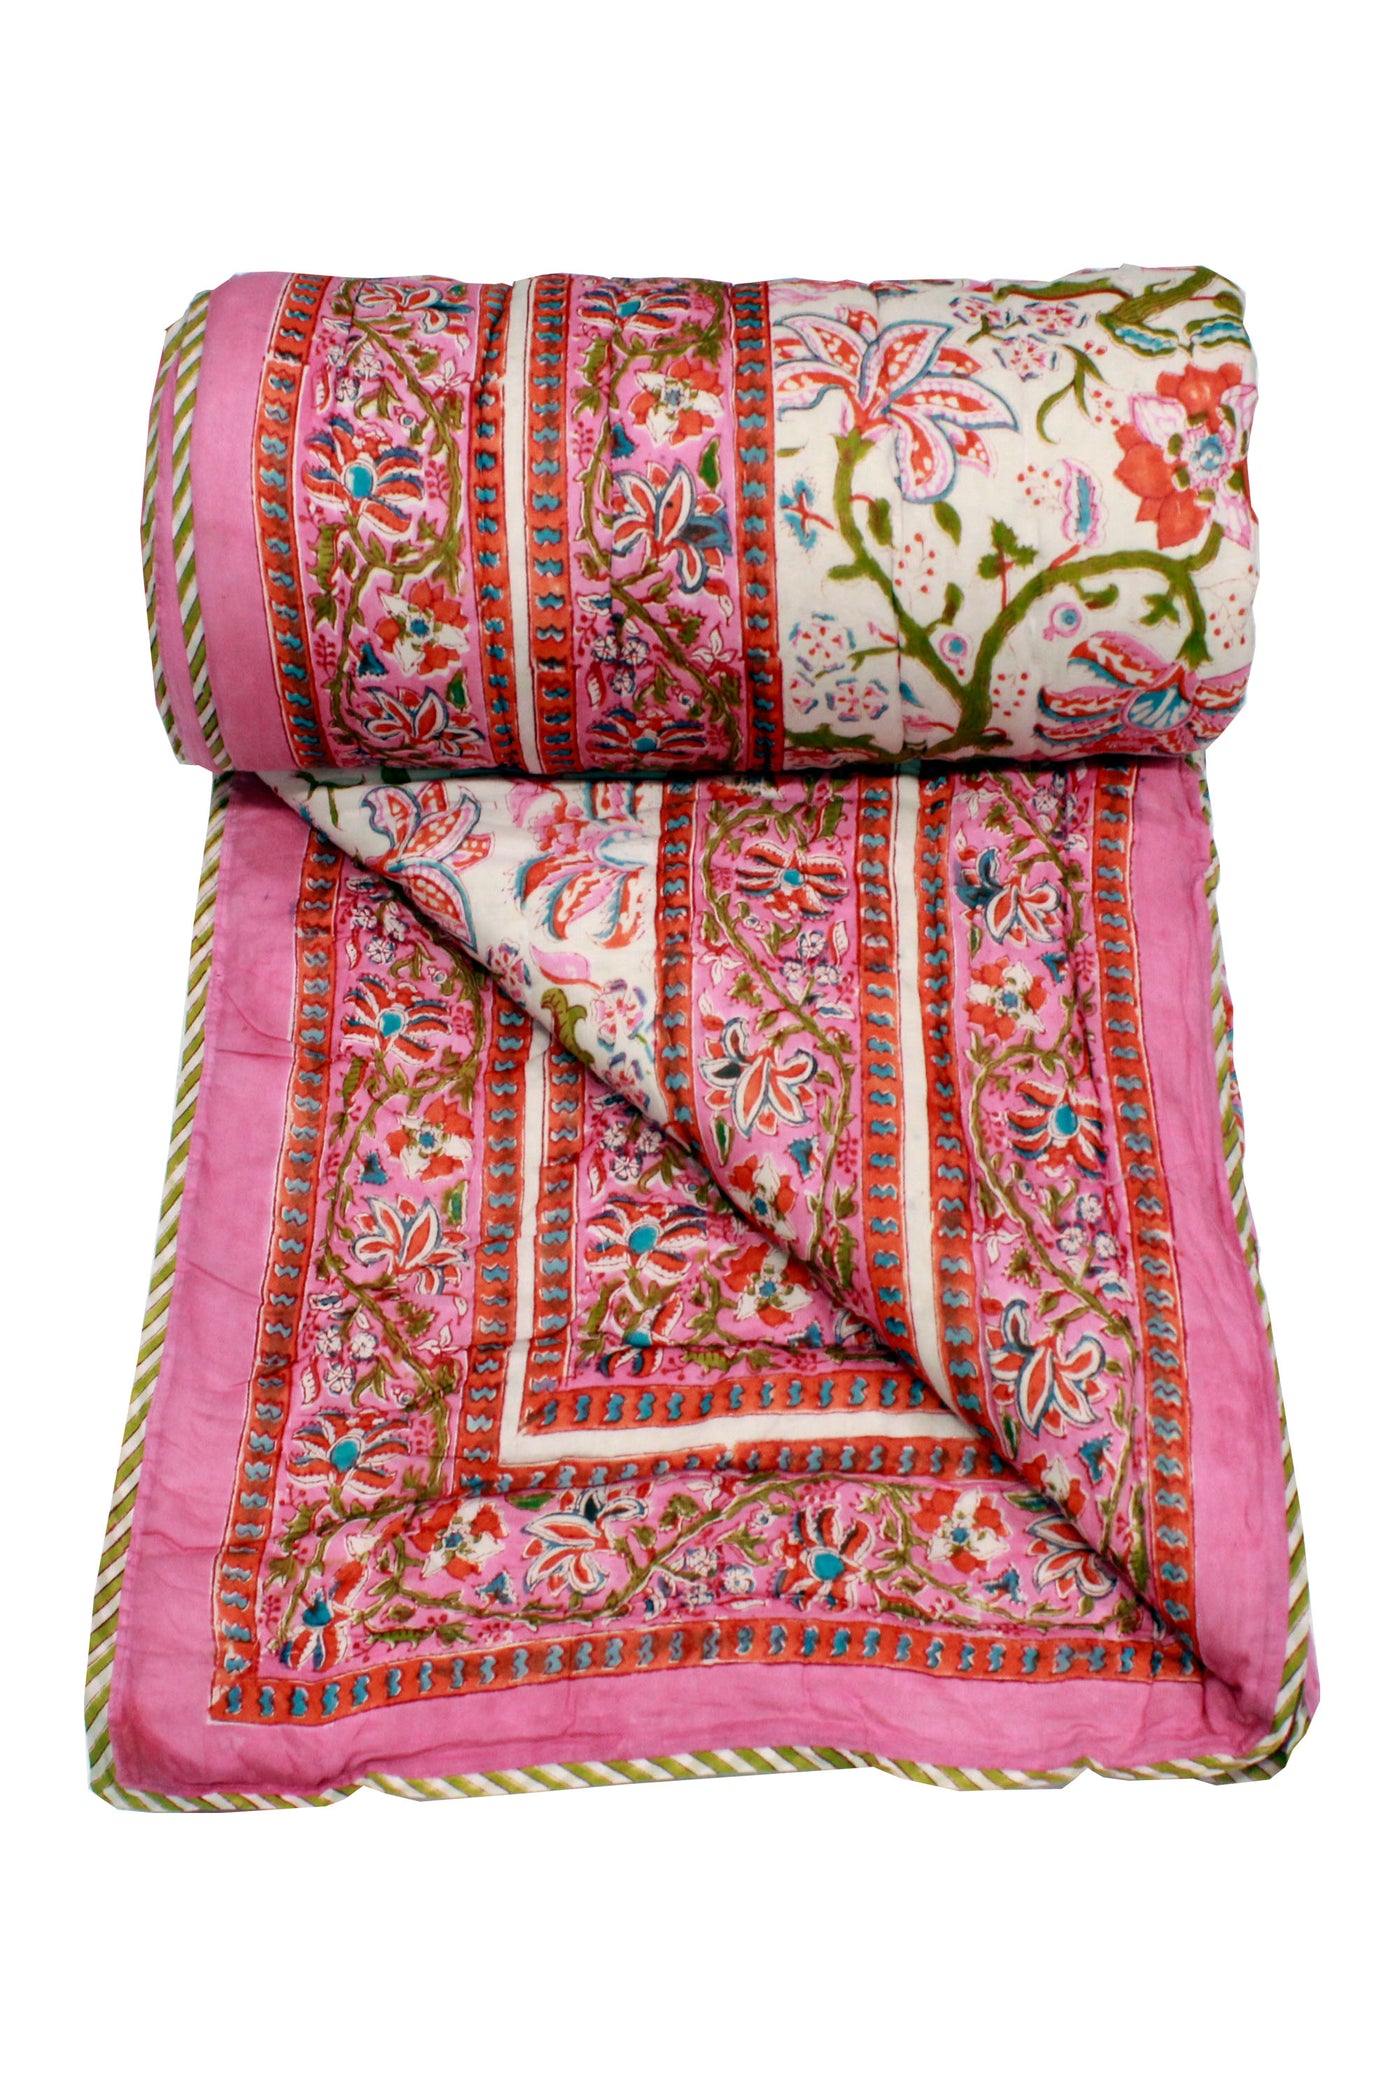 Quilt Big Flower Jaal Hand Block Print in Blossom Pink